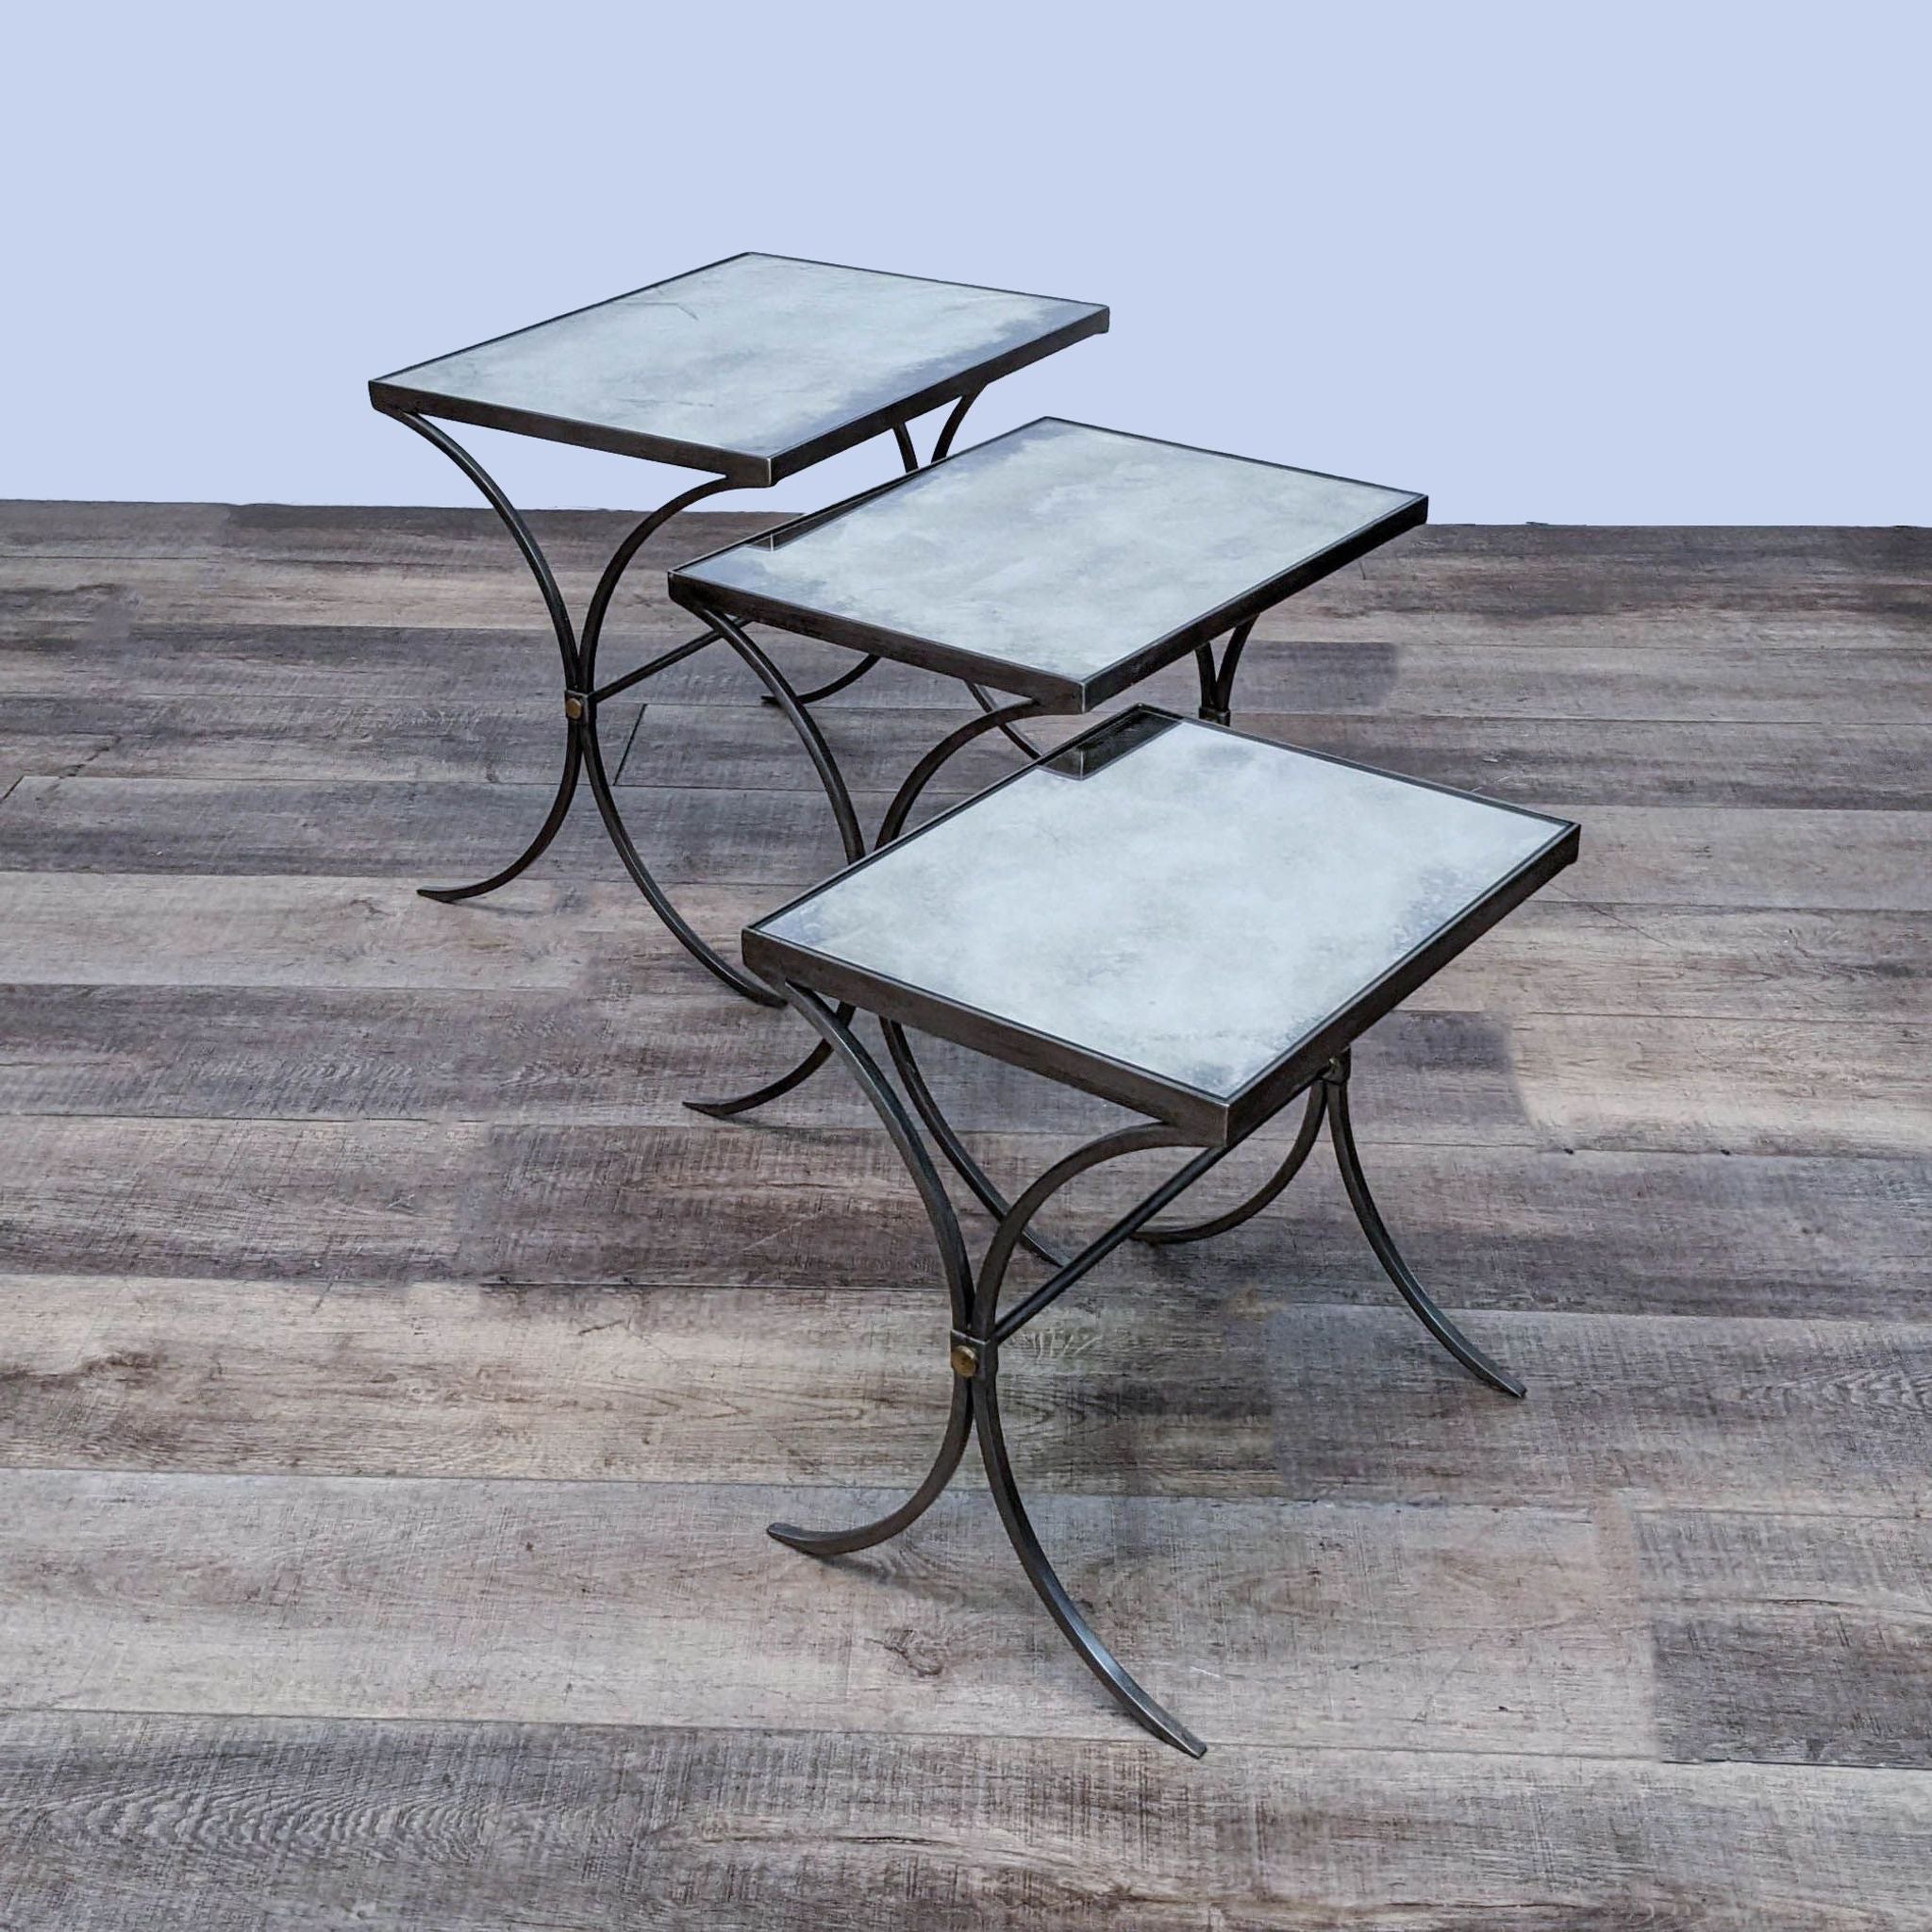 Set of three nesting end tables by Bernhardt Furniture, each with curved metal legs and mirrored tops.